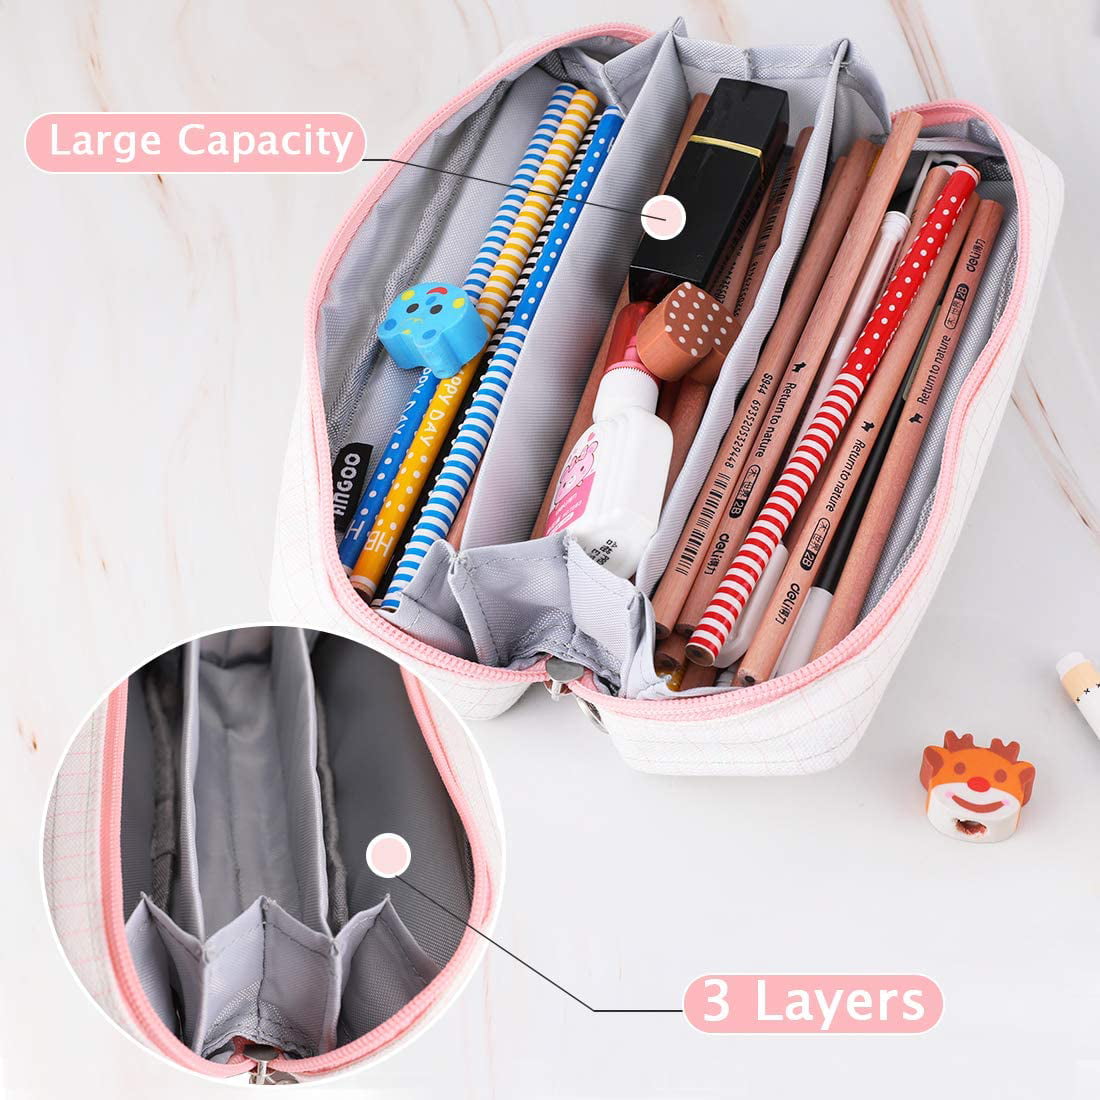 Oyachic Pencil Case with 3 Compartments Large Capacity Pencil Pouch Grid Stationery Bag Double Zipper Pencil Bag Canvas Pencil Holder for Students Pink and White Plaid 